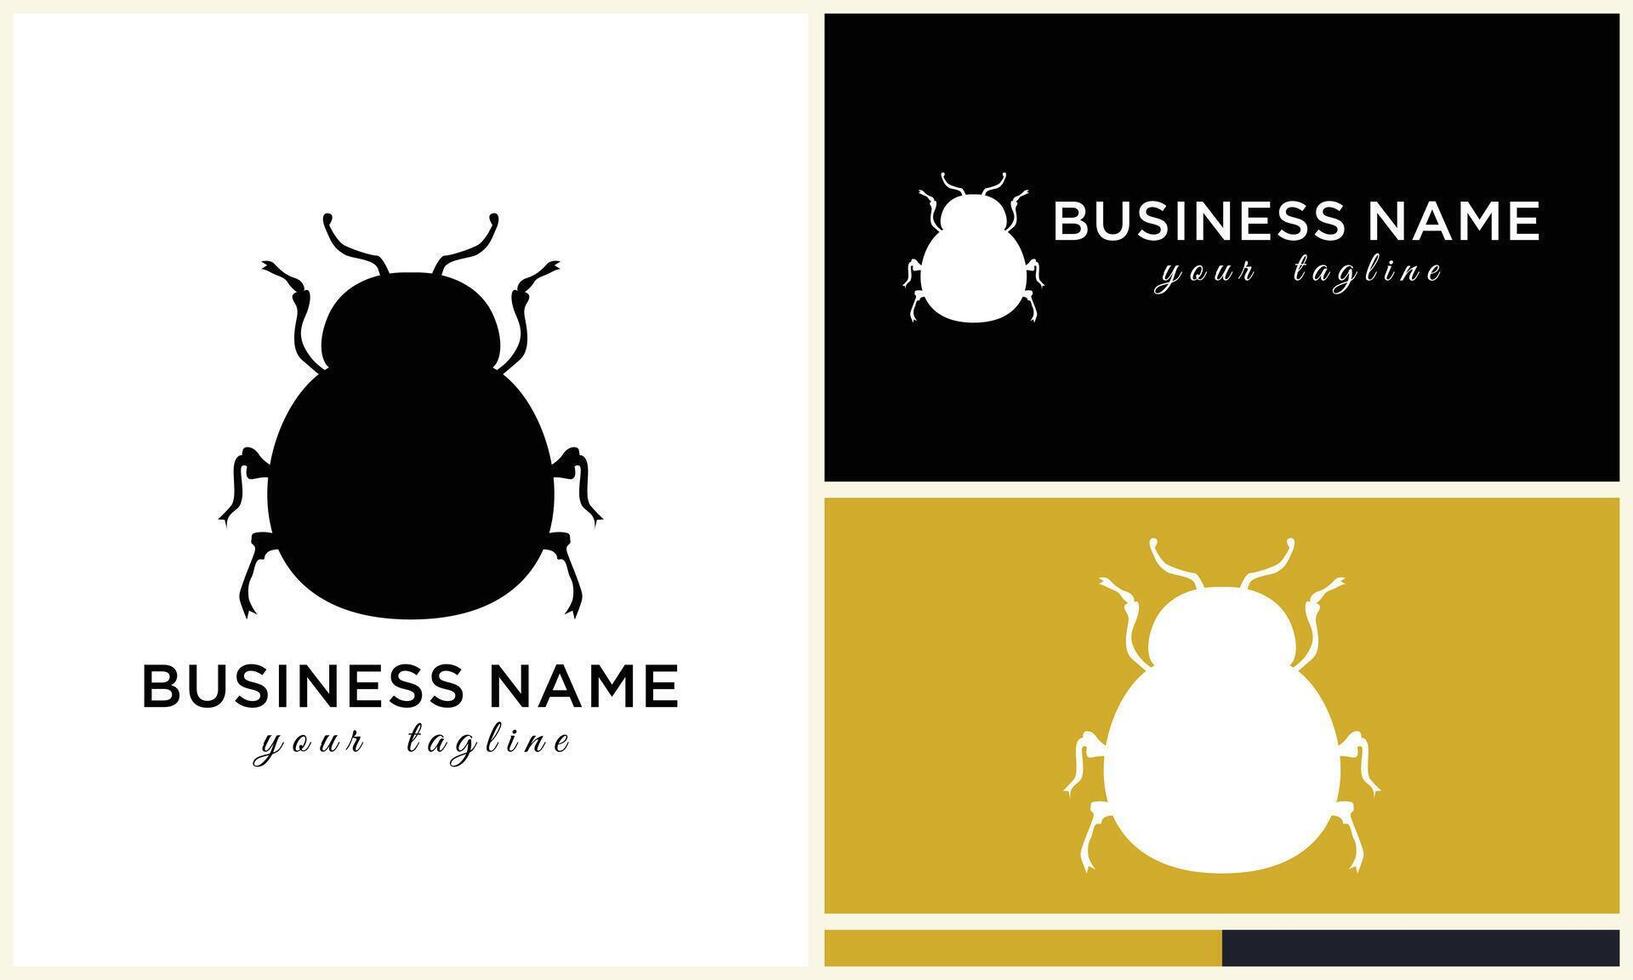 silhouette beetle insect ant template vector